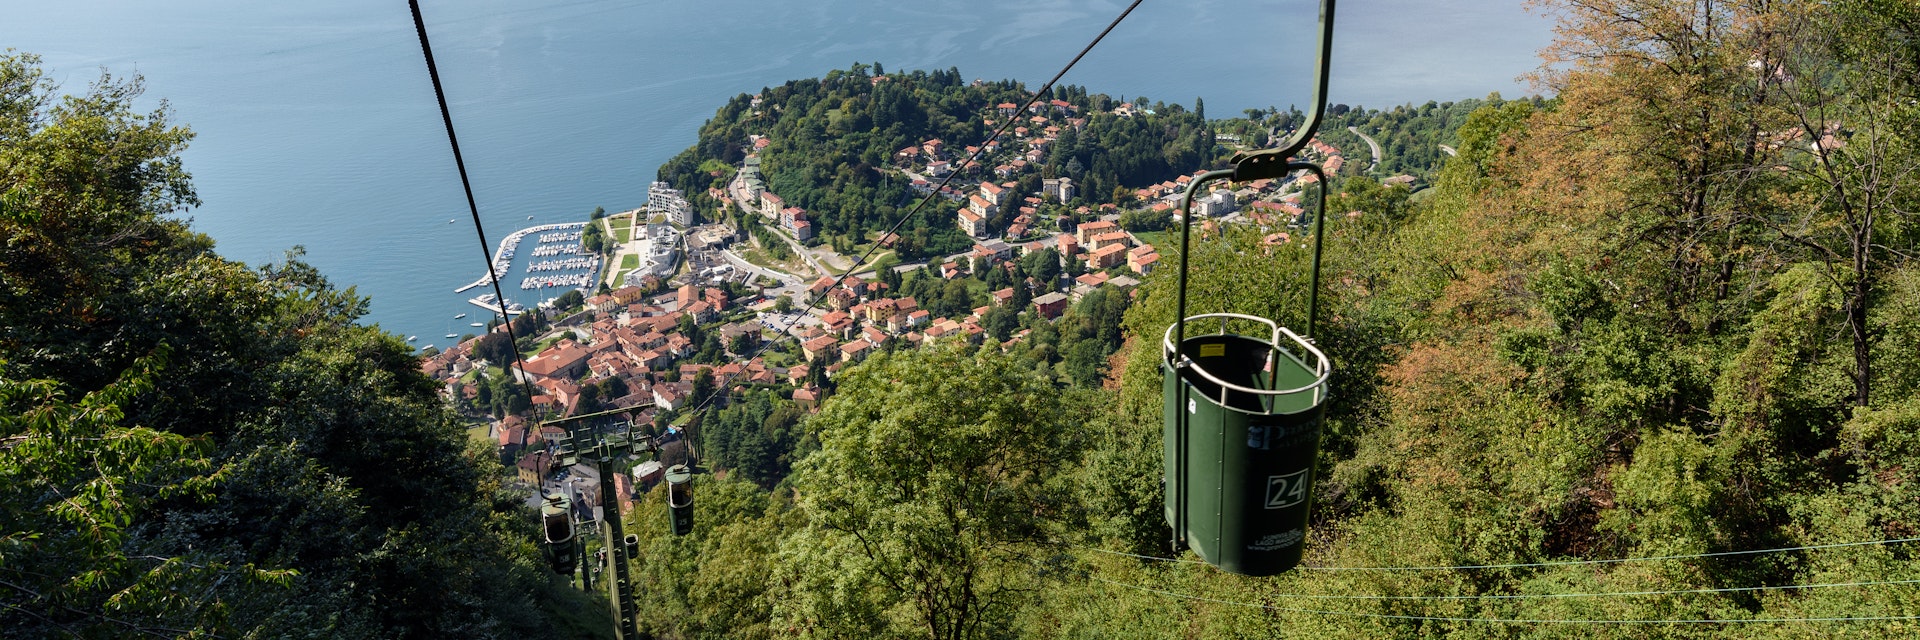 Two-seat cable cars take you gently up almost to the summit of Sasso del Ferro mountain, from where you can admire a magnificent view over Lake Maggiore.